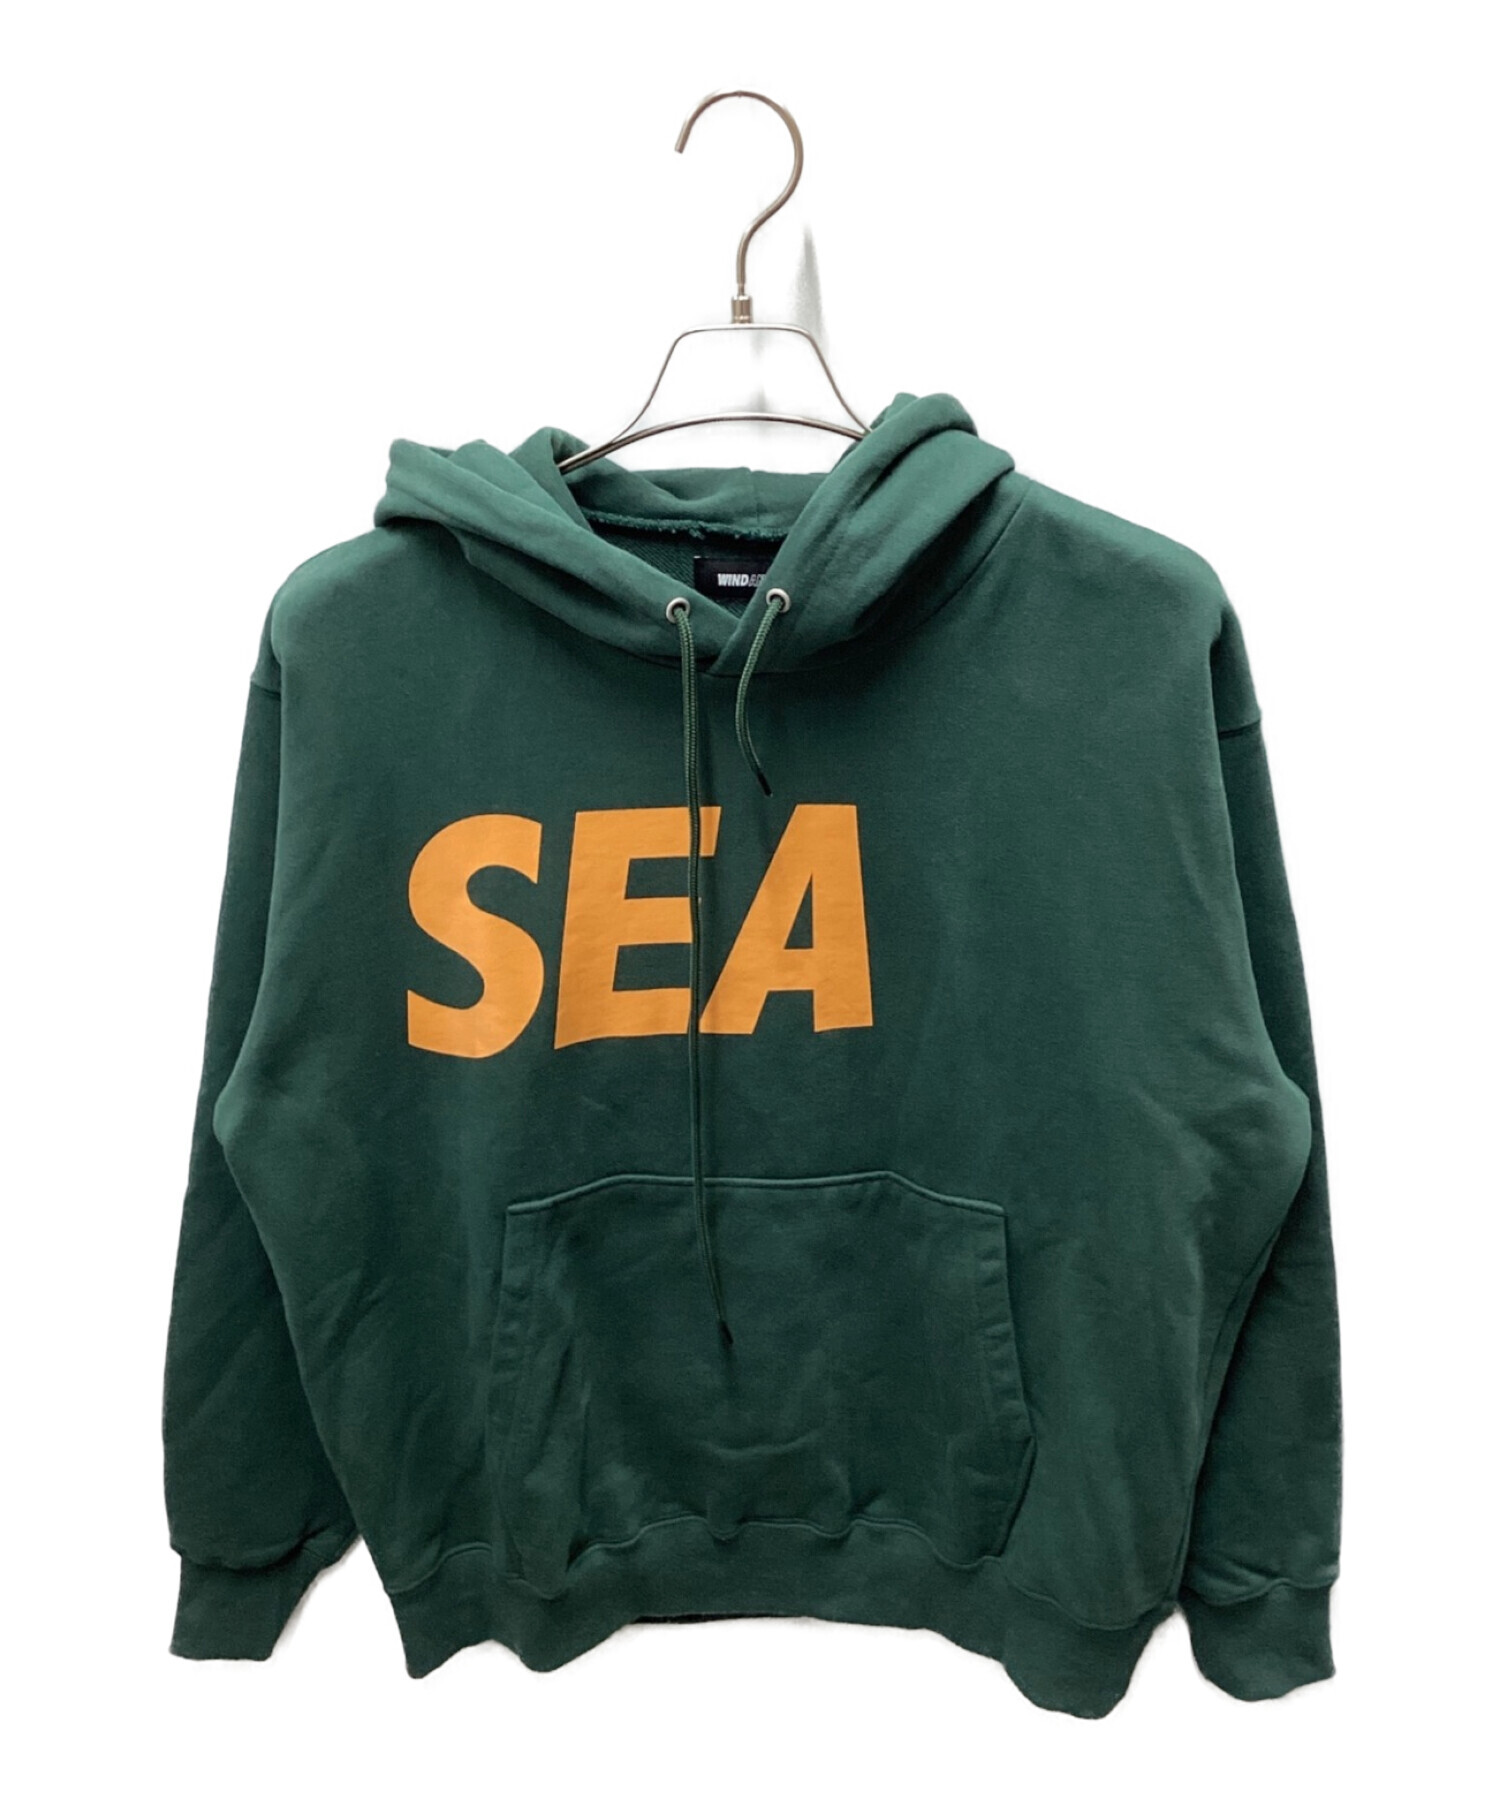 WIND AND SEA GN5 x WDS 5EA Hoodie L店頭で購入いたしました